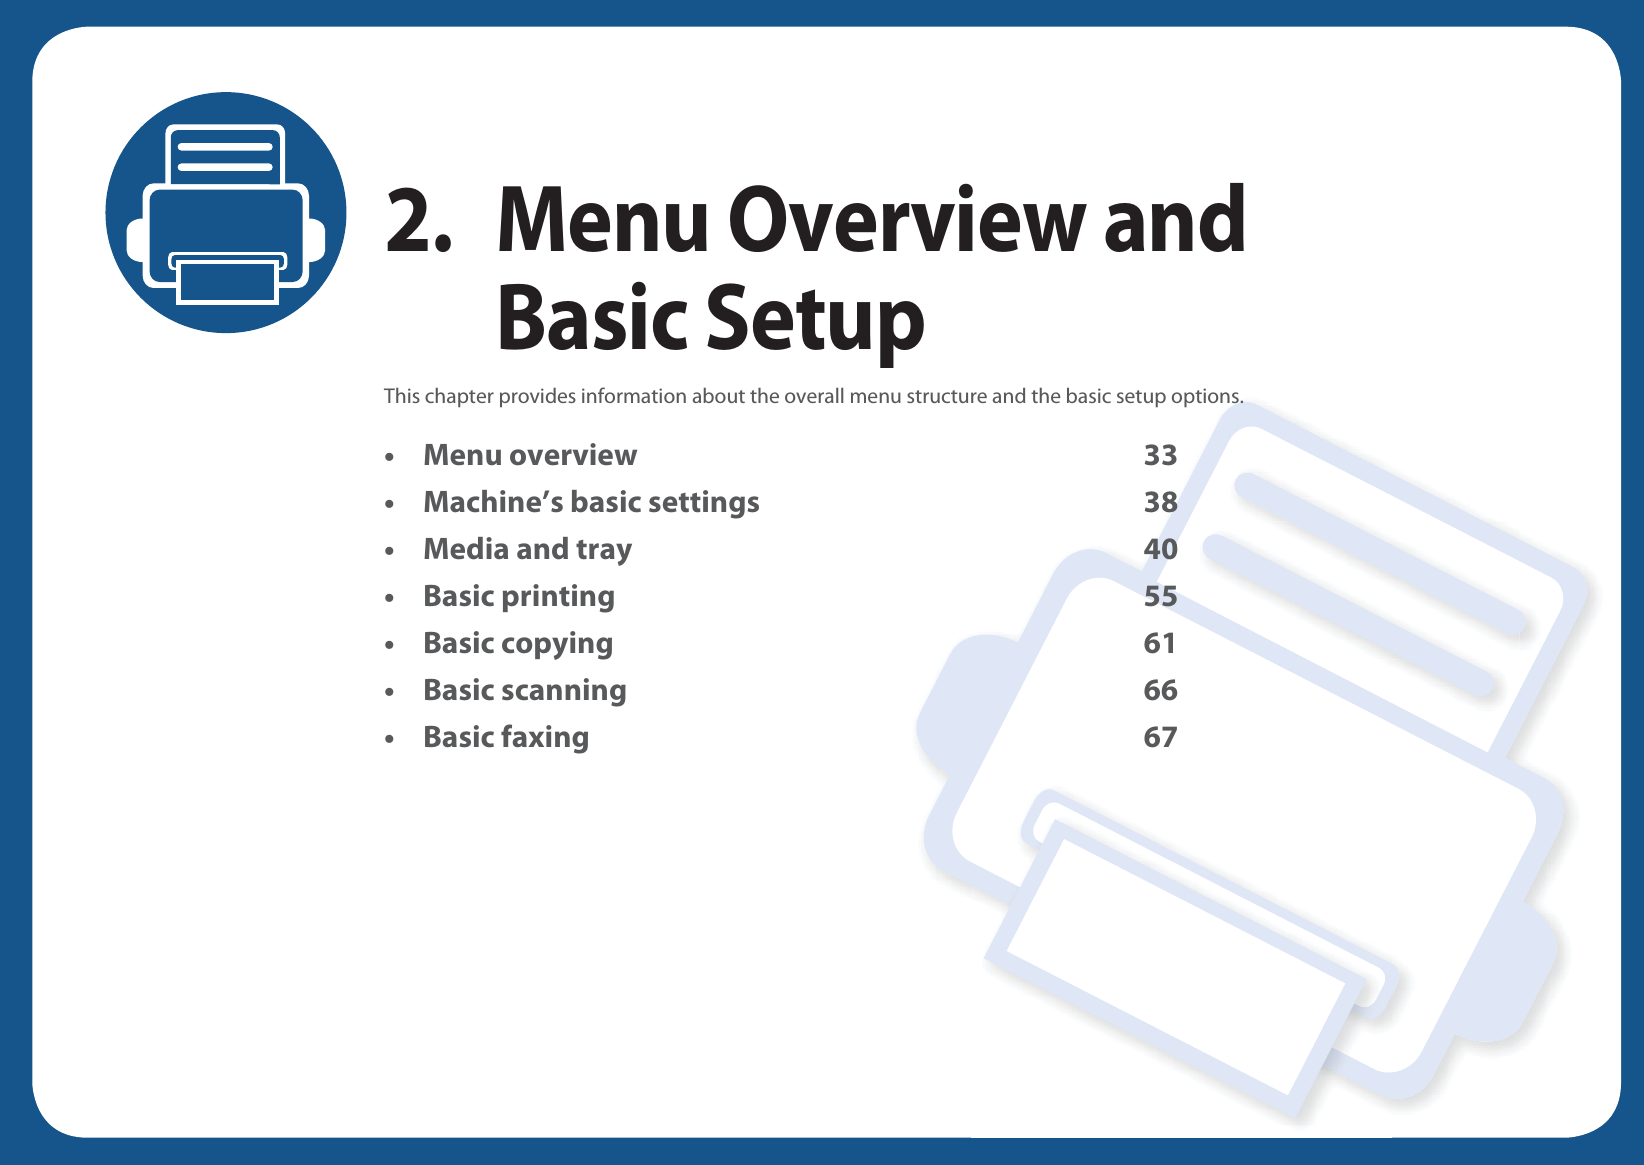 2. Menu Overview and Basic SetupThis chapter provides information about the overall menu structure and the basic setup options.• Menu overview 33• Machine’s basic settings 38• Media and tray 40• Basic printing 55• Basic copying 61• Basic scanning 66• Basic faxing 67